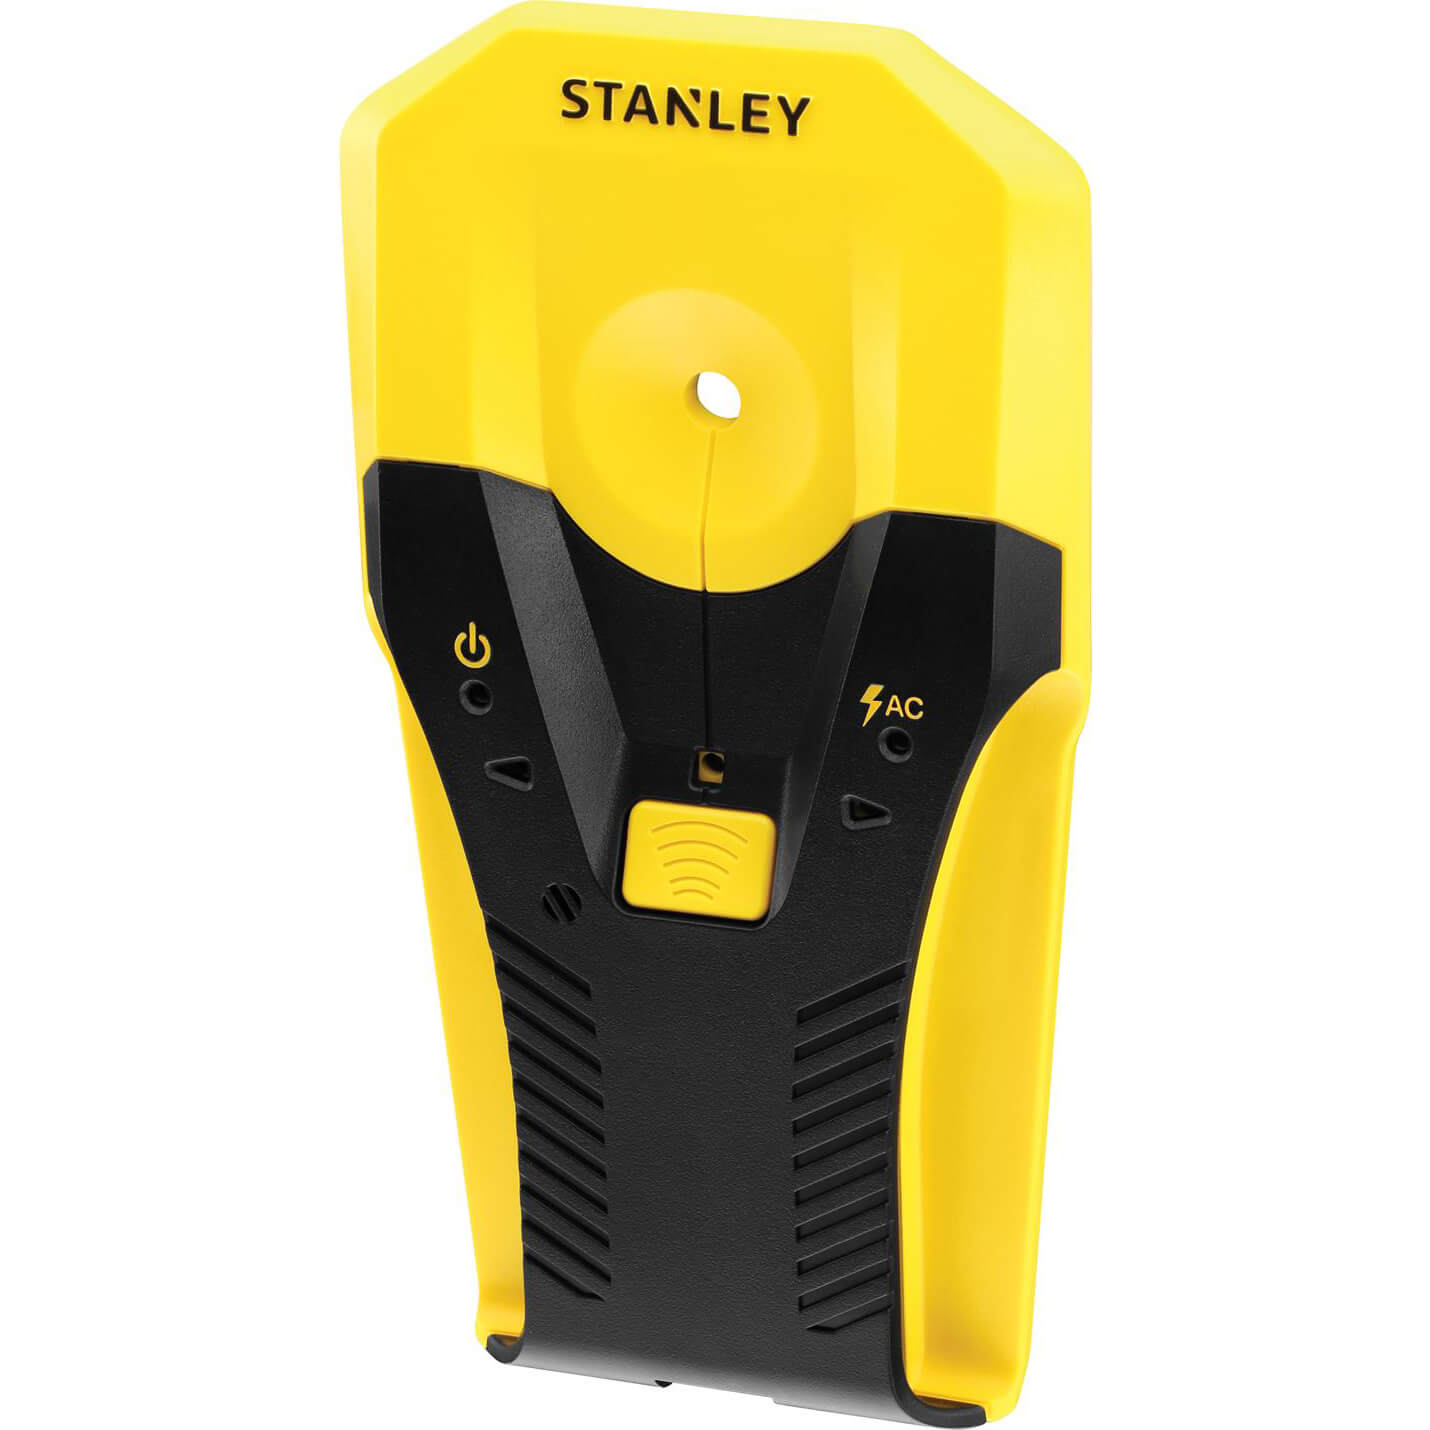 Image of Stanley Intelli Tools S160 Wood and Metal Stud and Cable Sensor